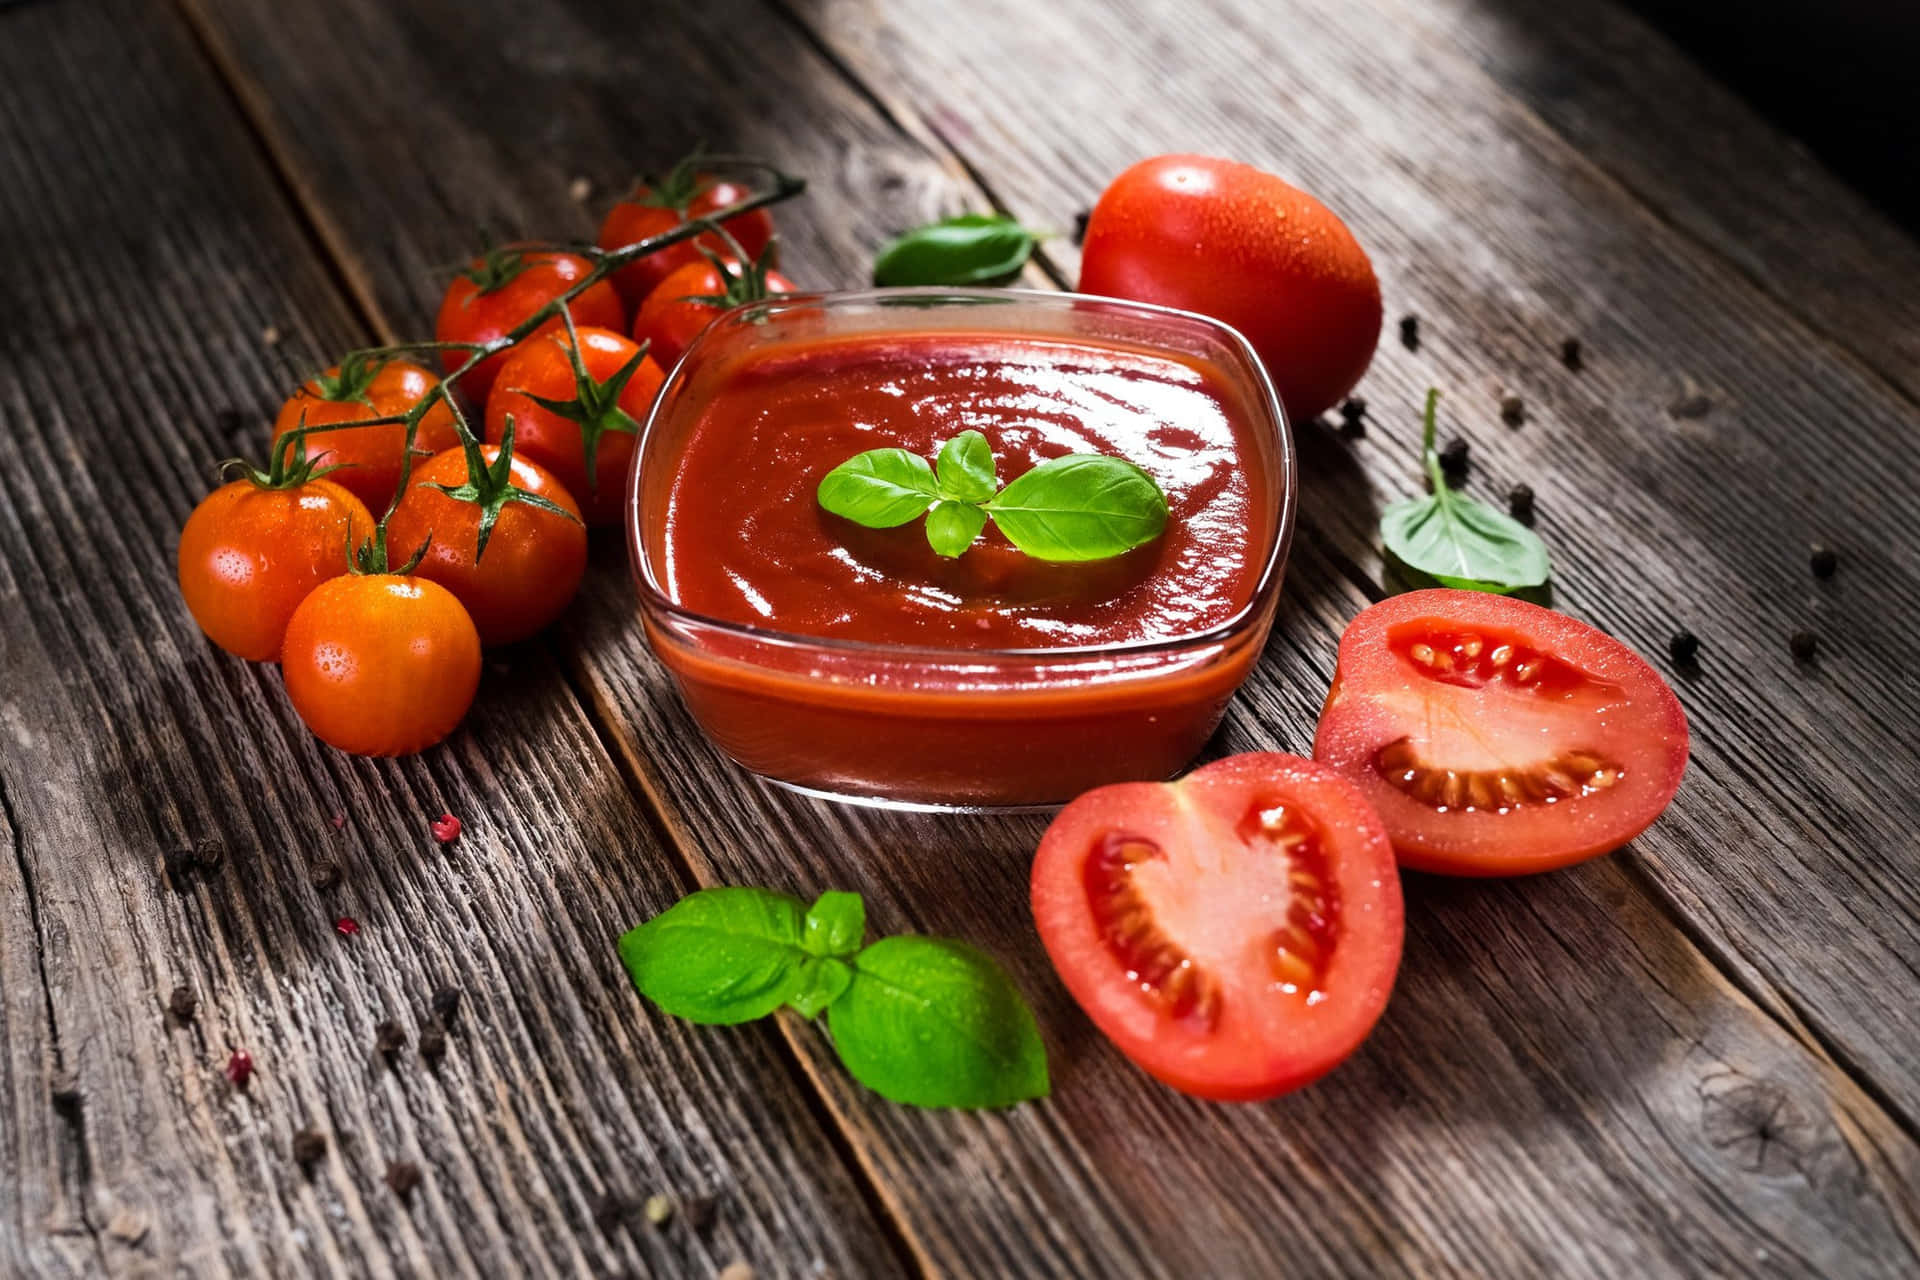 A delicious bowl of vibrant red sauce Wallpaper